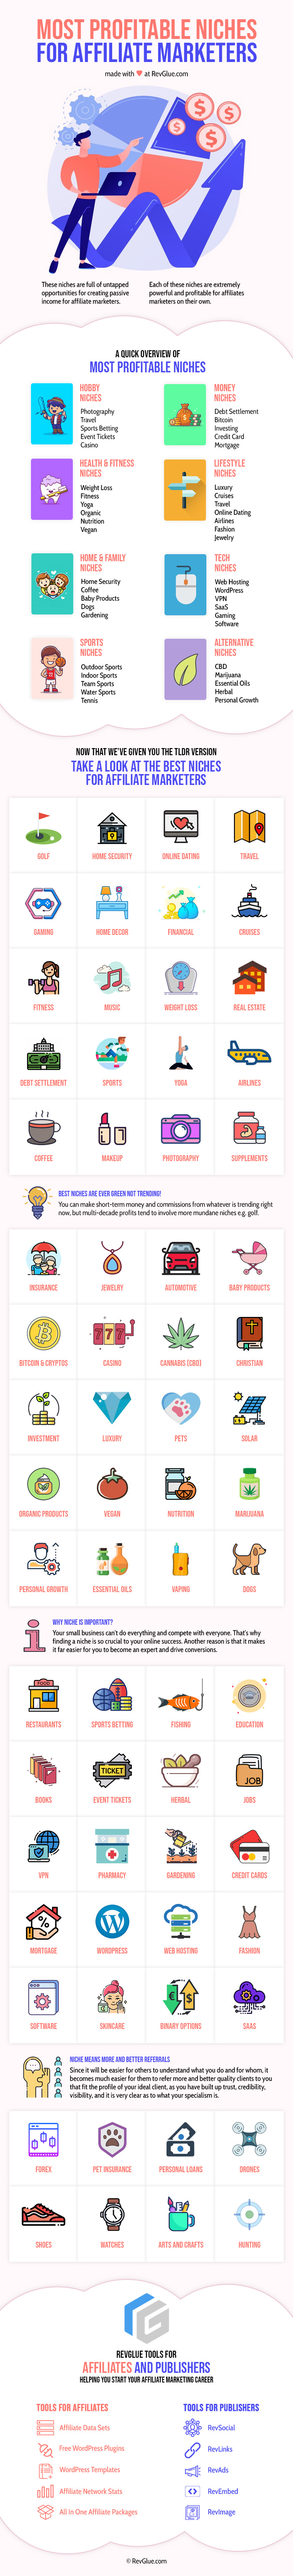 Most Profitable Niches for Affiliate Marketers Infographic